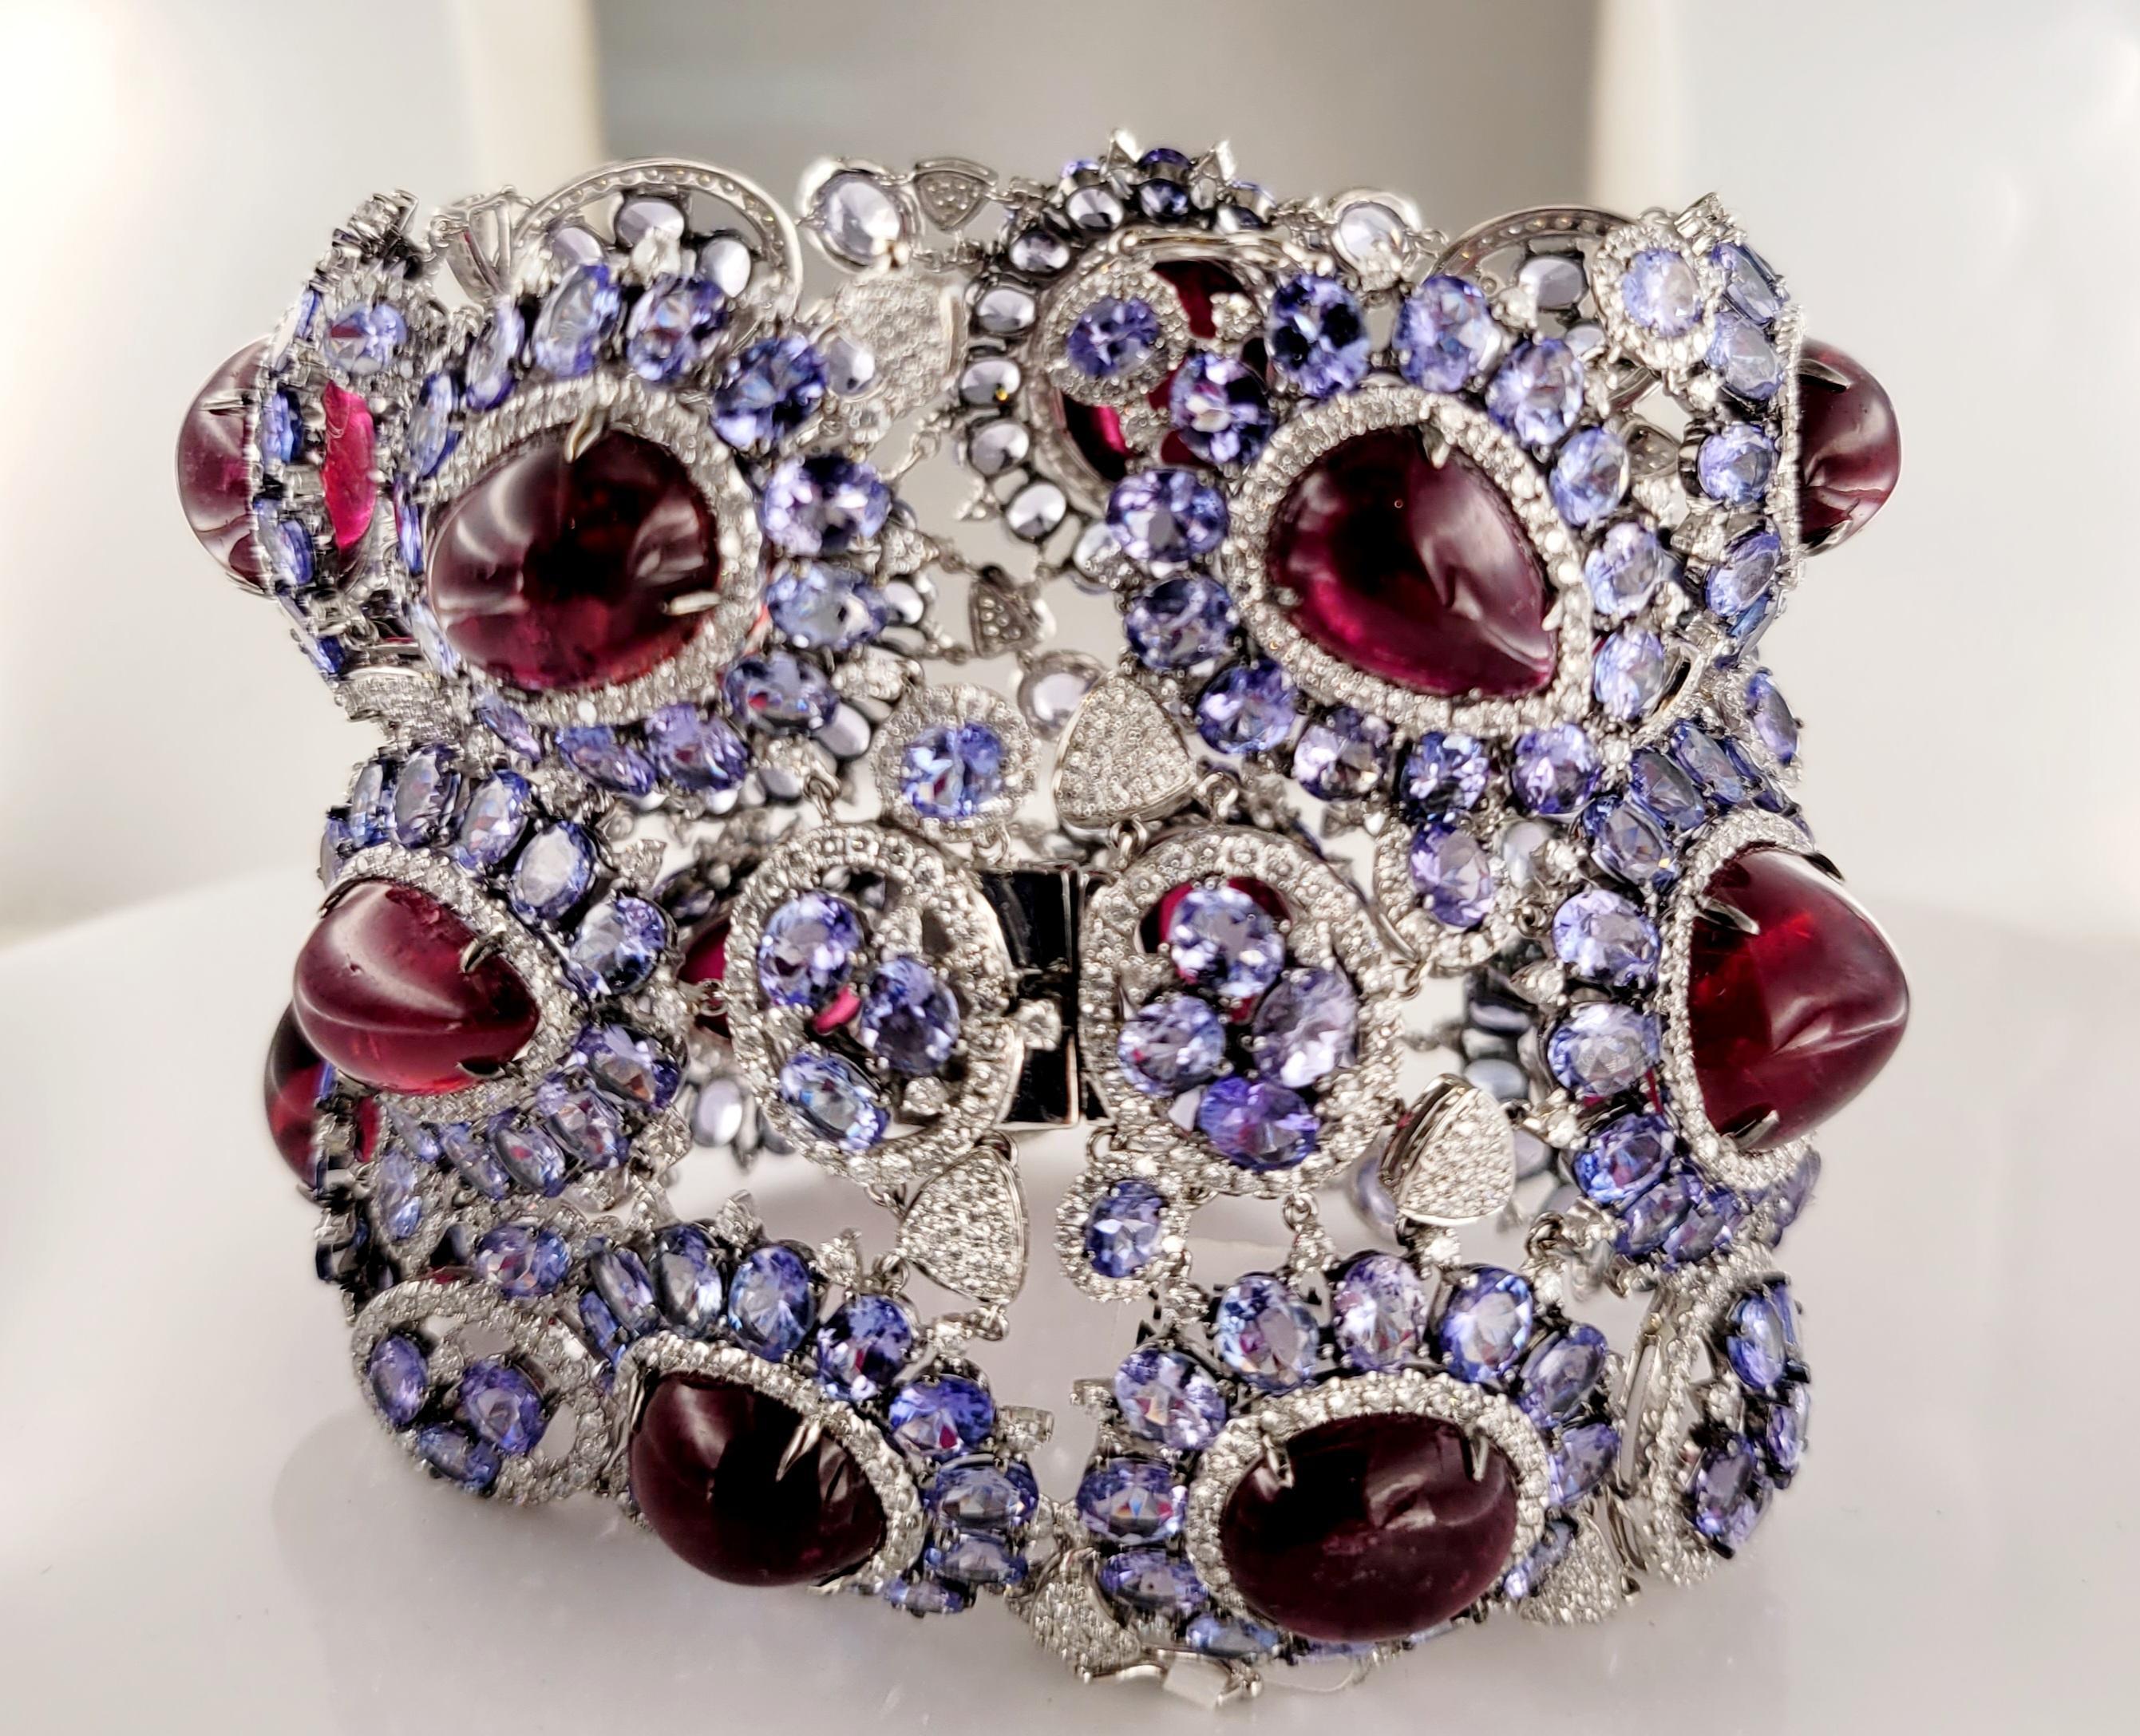 This magnificent bracelet showcases a stunning 237 carat Rubellite, complemented by 16 carats of breathtaking Tanzanite and 8 carats sparkling Diamonds. The piece is crafted in 18 karat white gold and designed for those who appreciate the finer